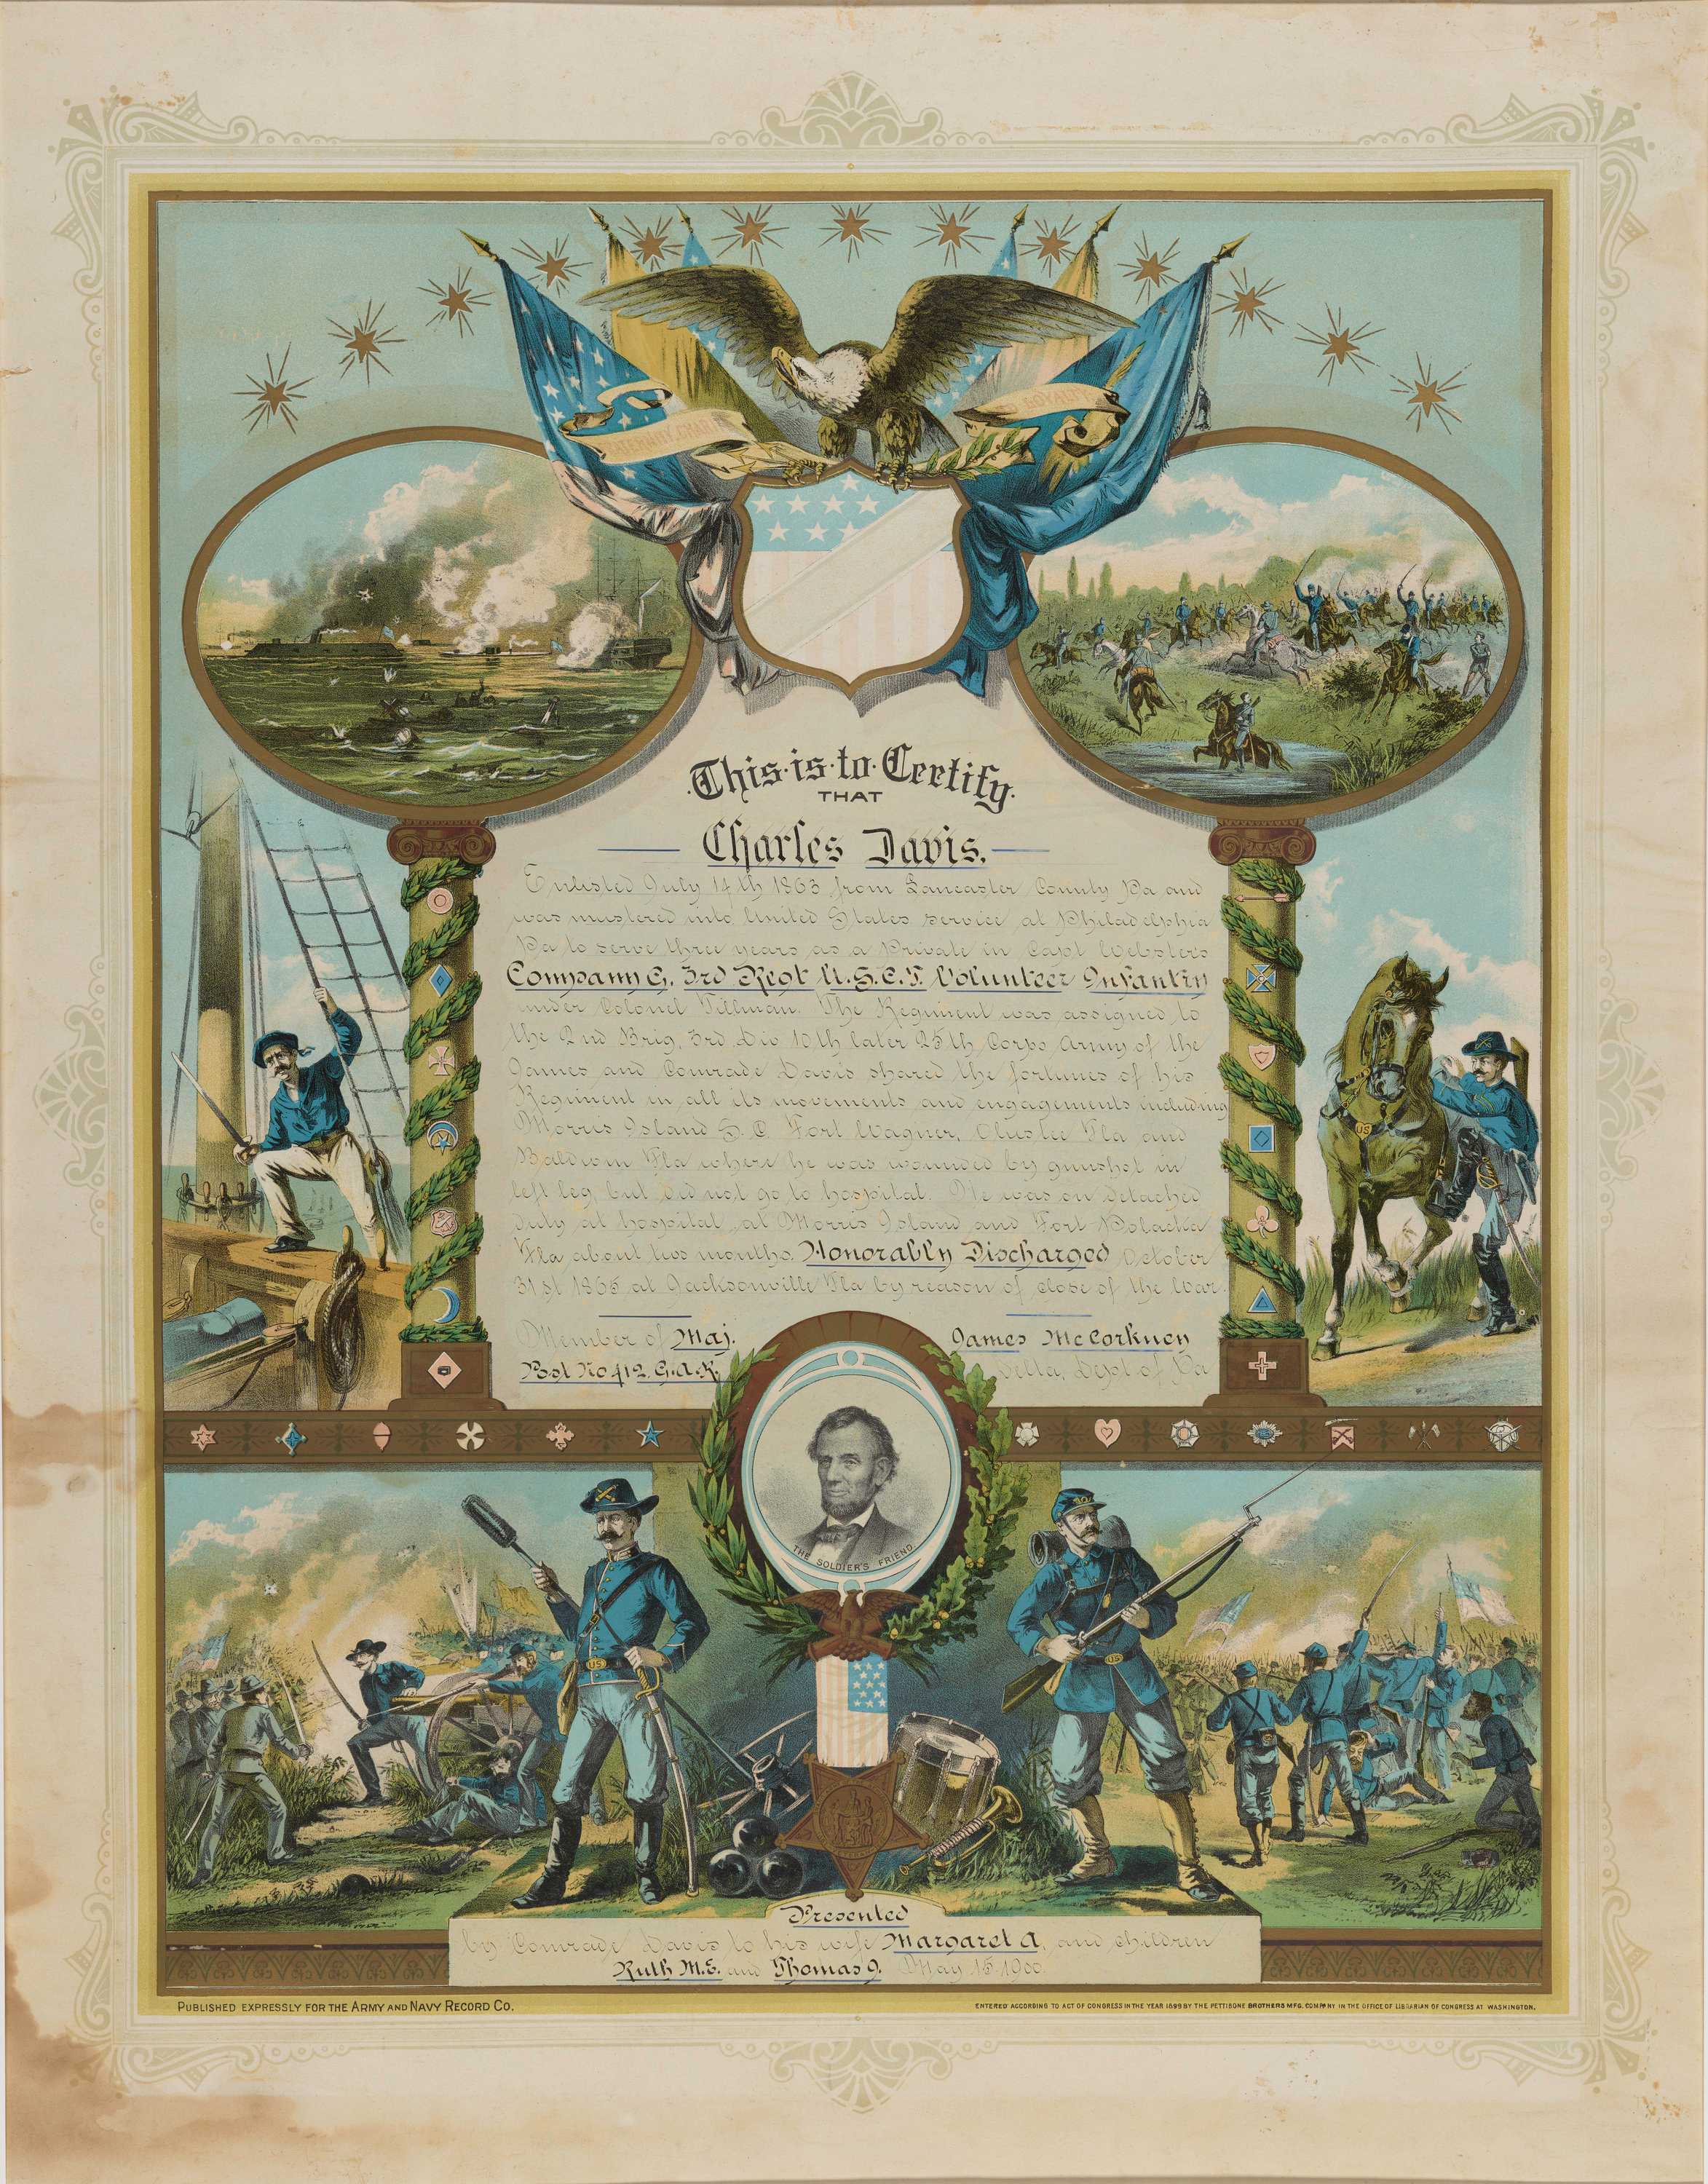 A certificate of Honorable Discharge from 1900 with colorful illustrations